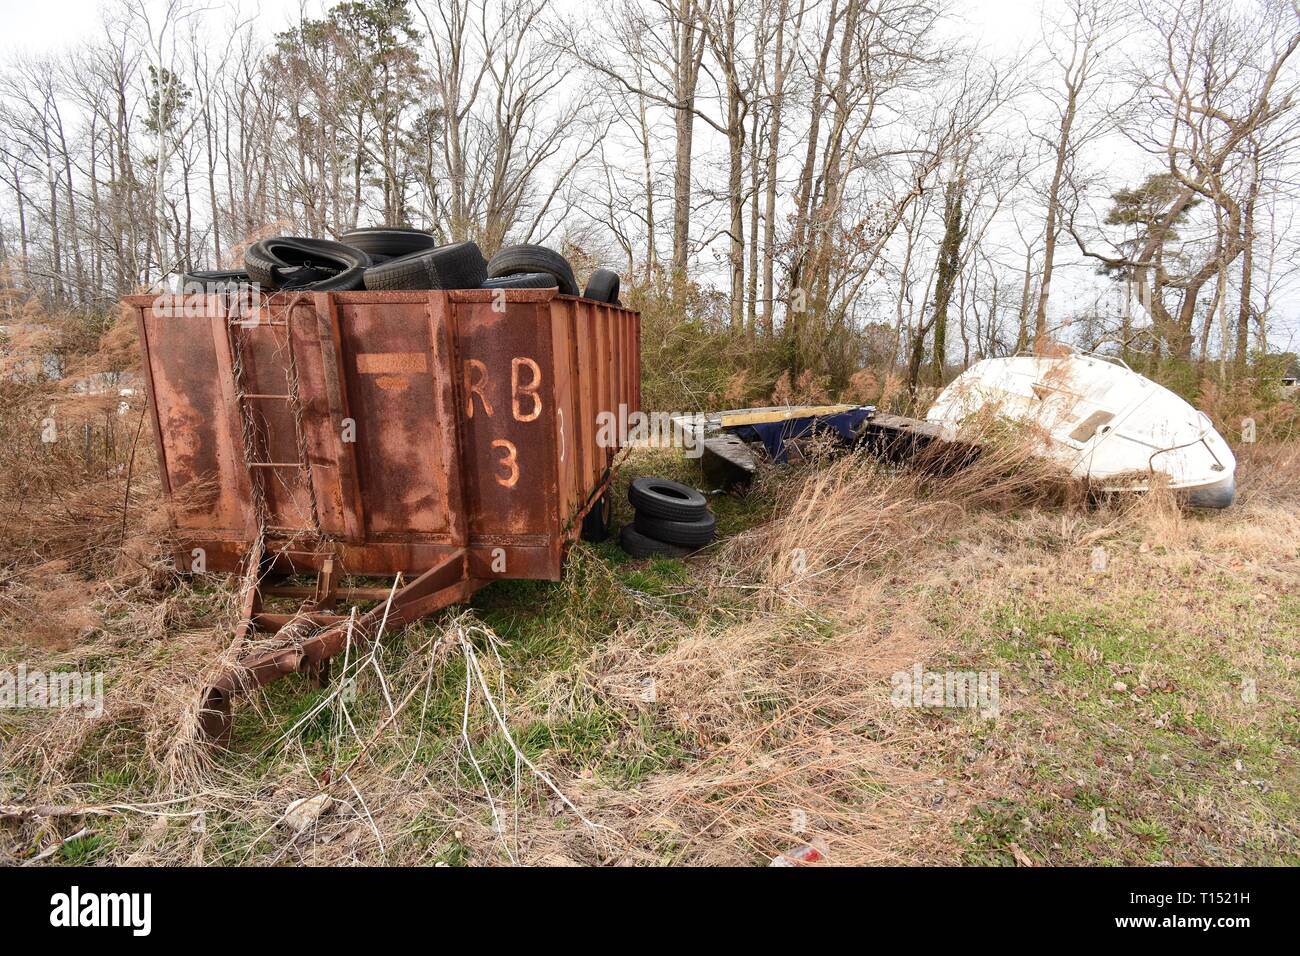 Used and worn tires and overturned unseaworthy boat in overgrown yard in Maryland USA, the backyard of a home and business Stock Photo